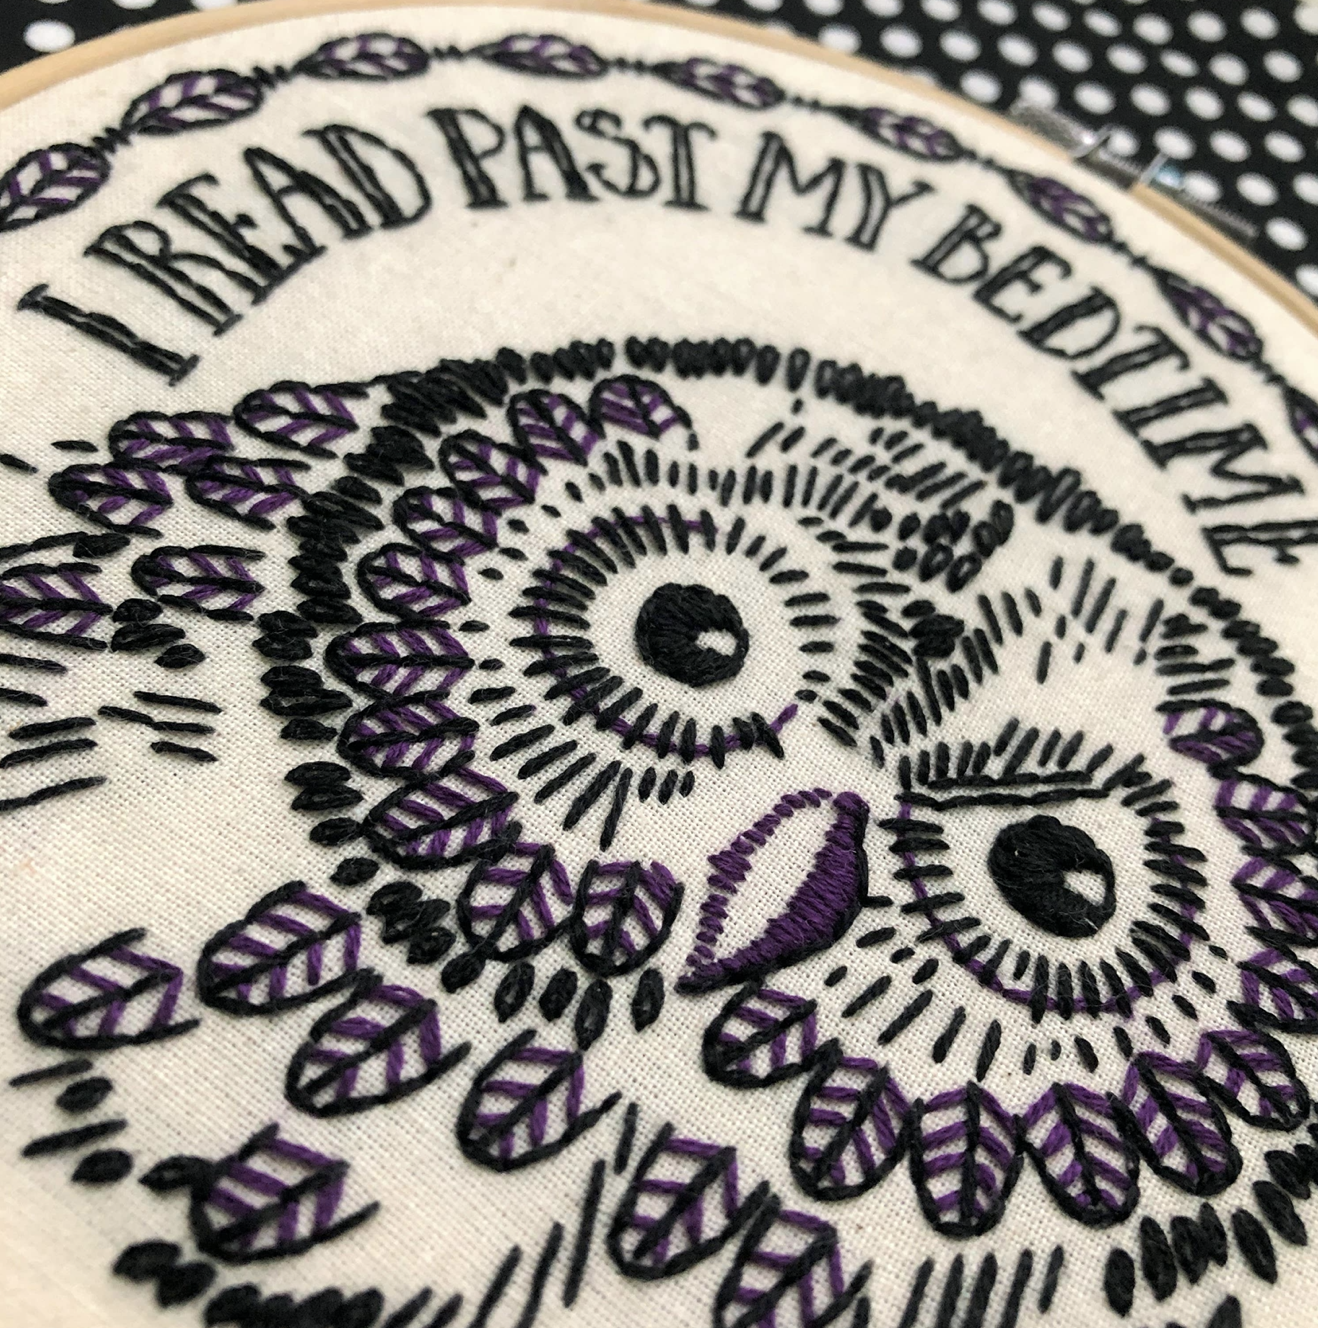 "I Read Past My Bedtime" Owl Embroidery Kit